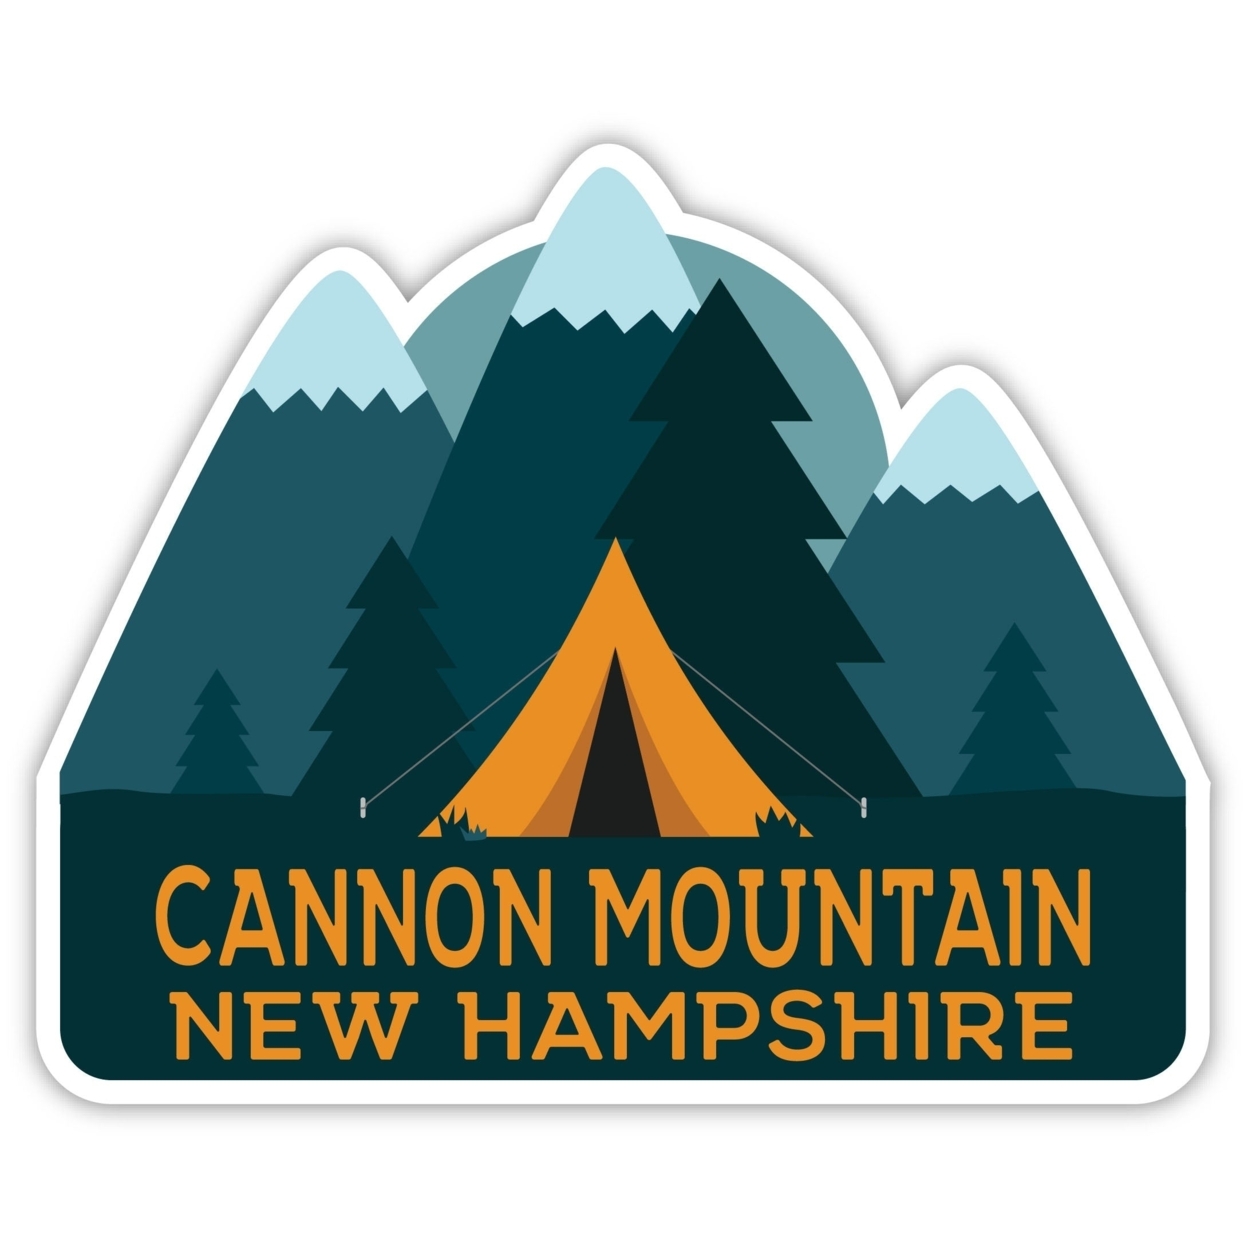 Cannon Mountain New Hampshire Souvenir Decorative Stickers (Choose Theme And Size) - 4-Pack, 4-Inch, Tent